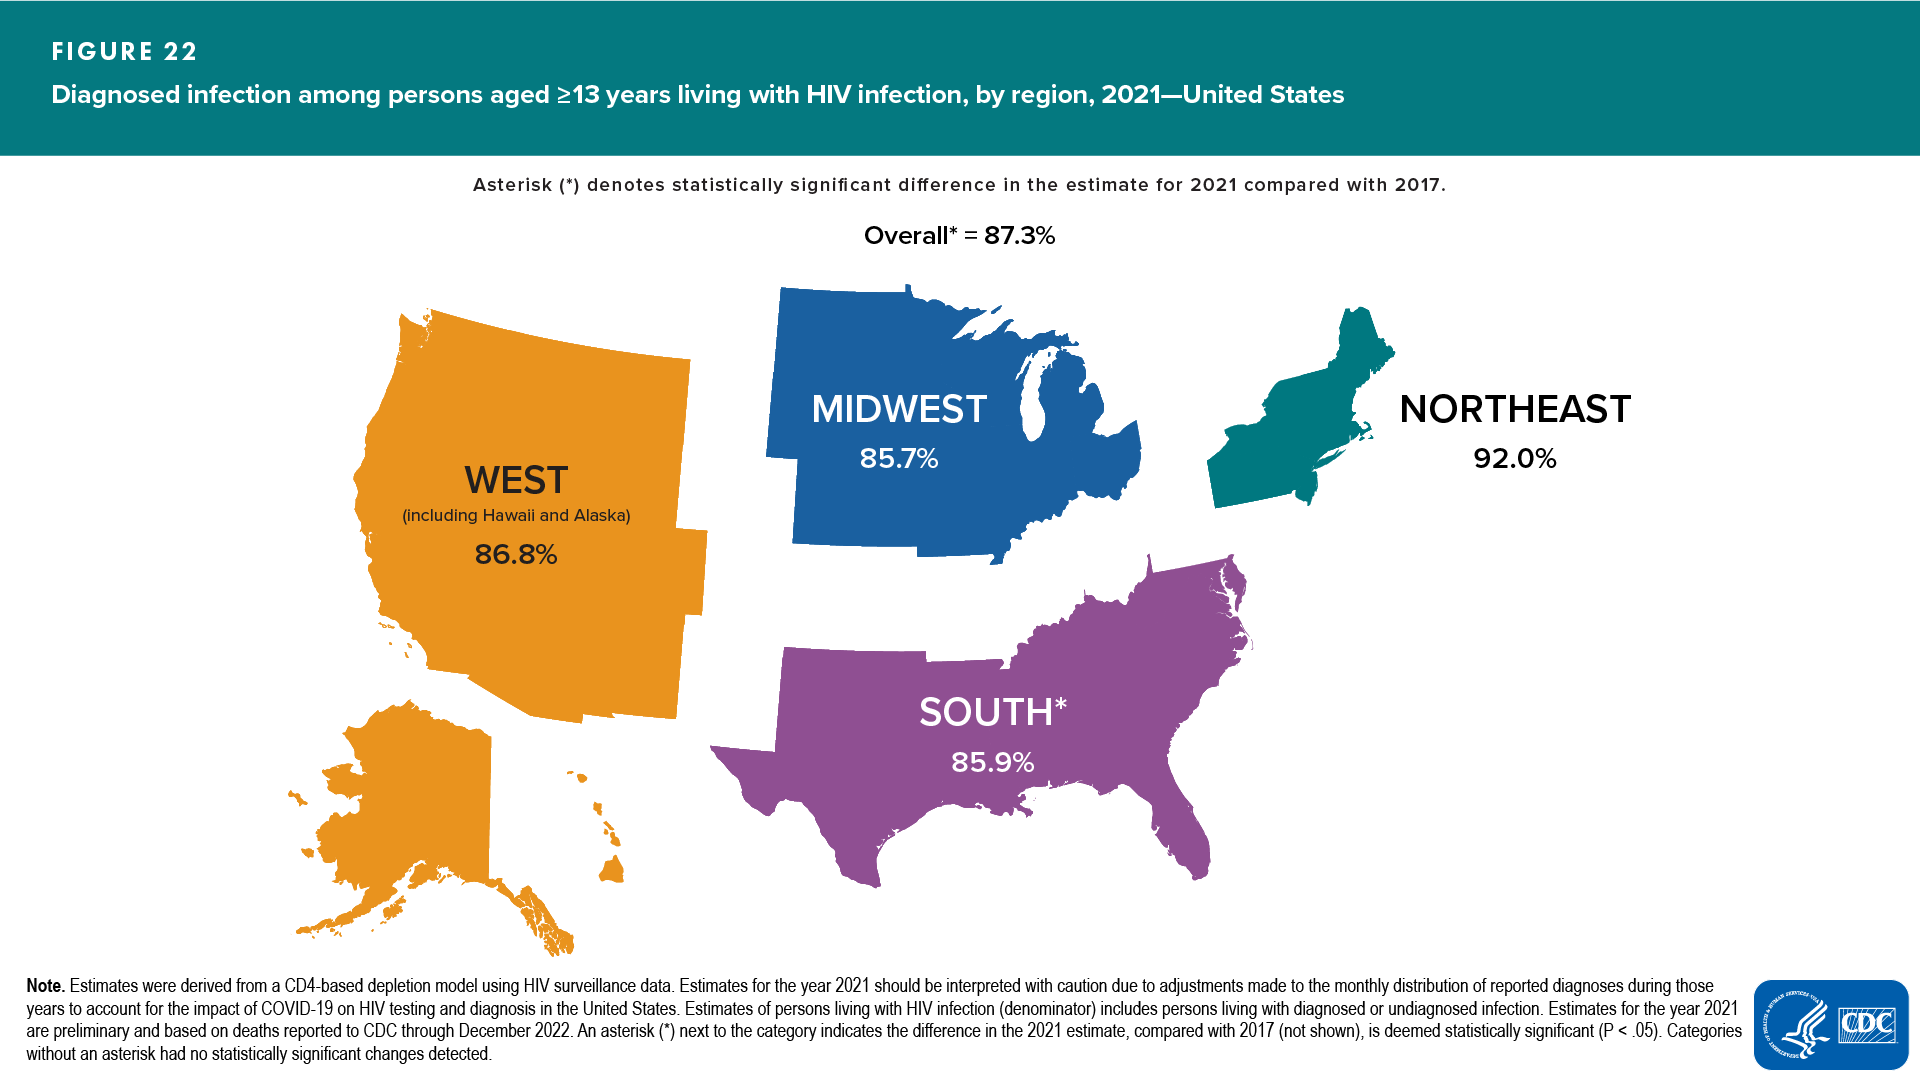 Figure 22. Diagnosed infection among persons aged ≥13 years living with HIV infection, by region, 2021—United States